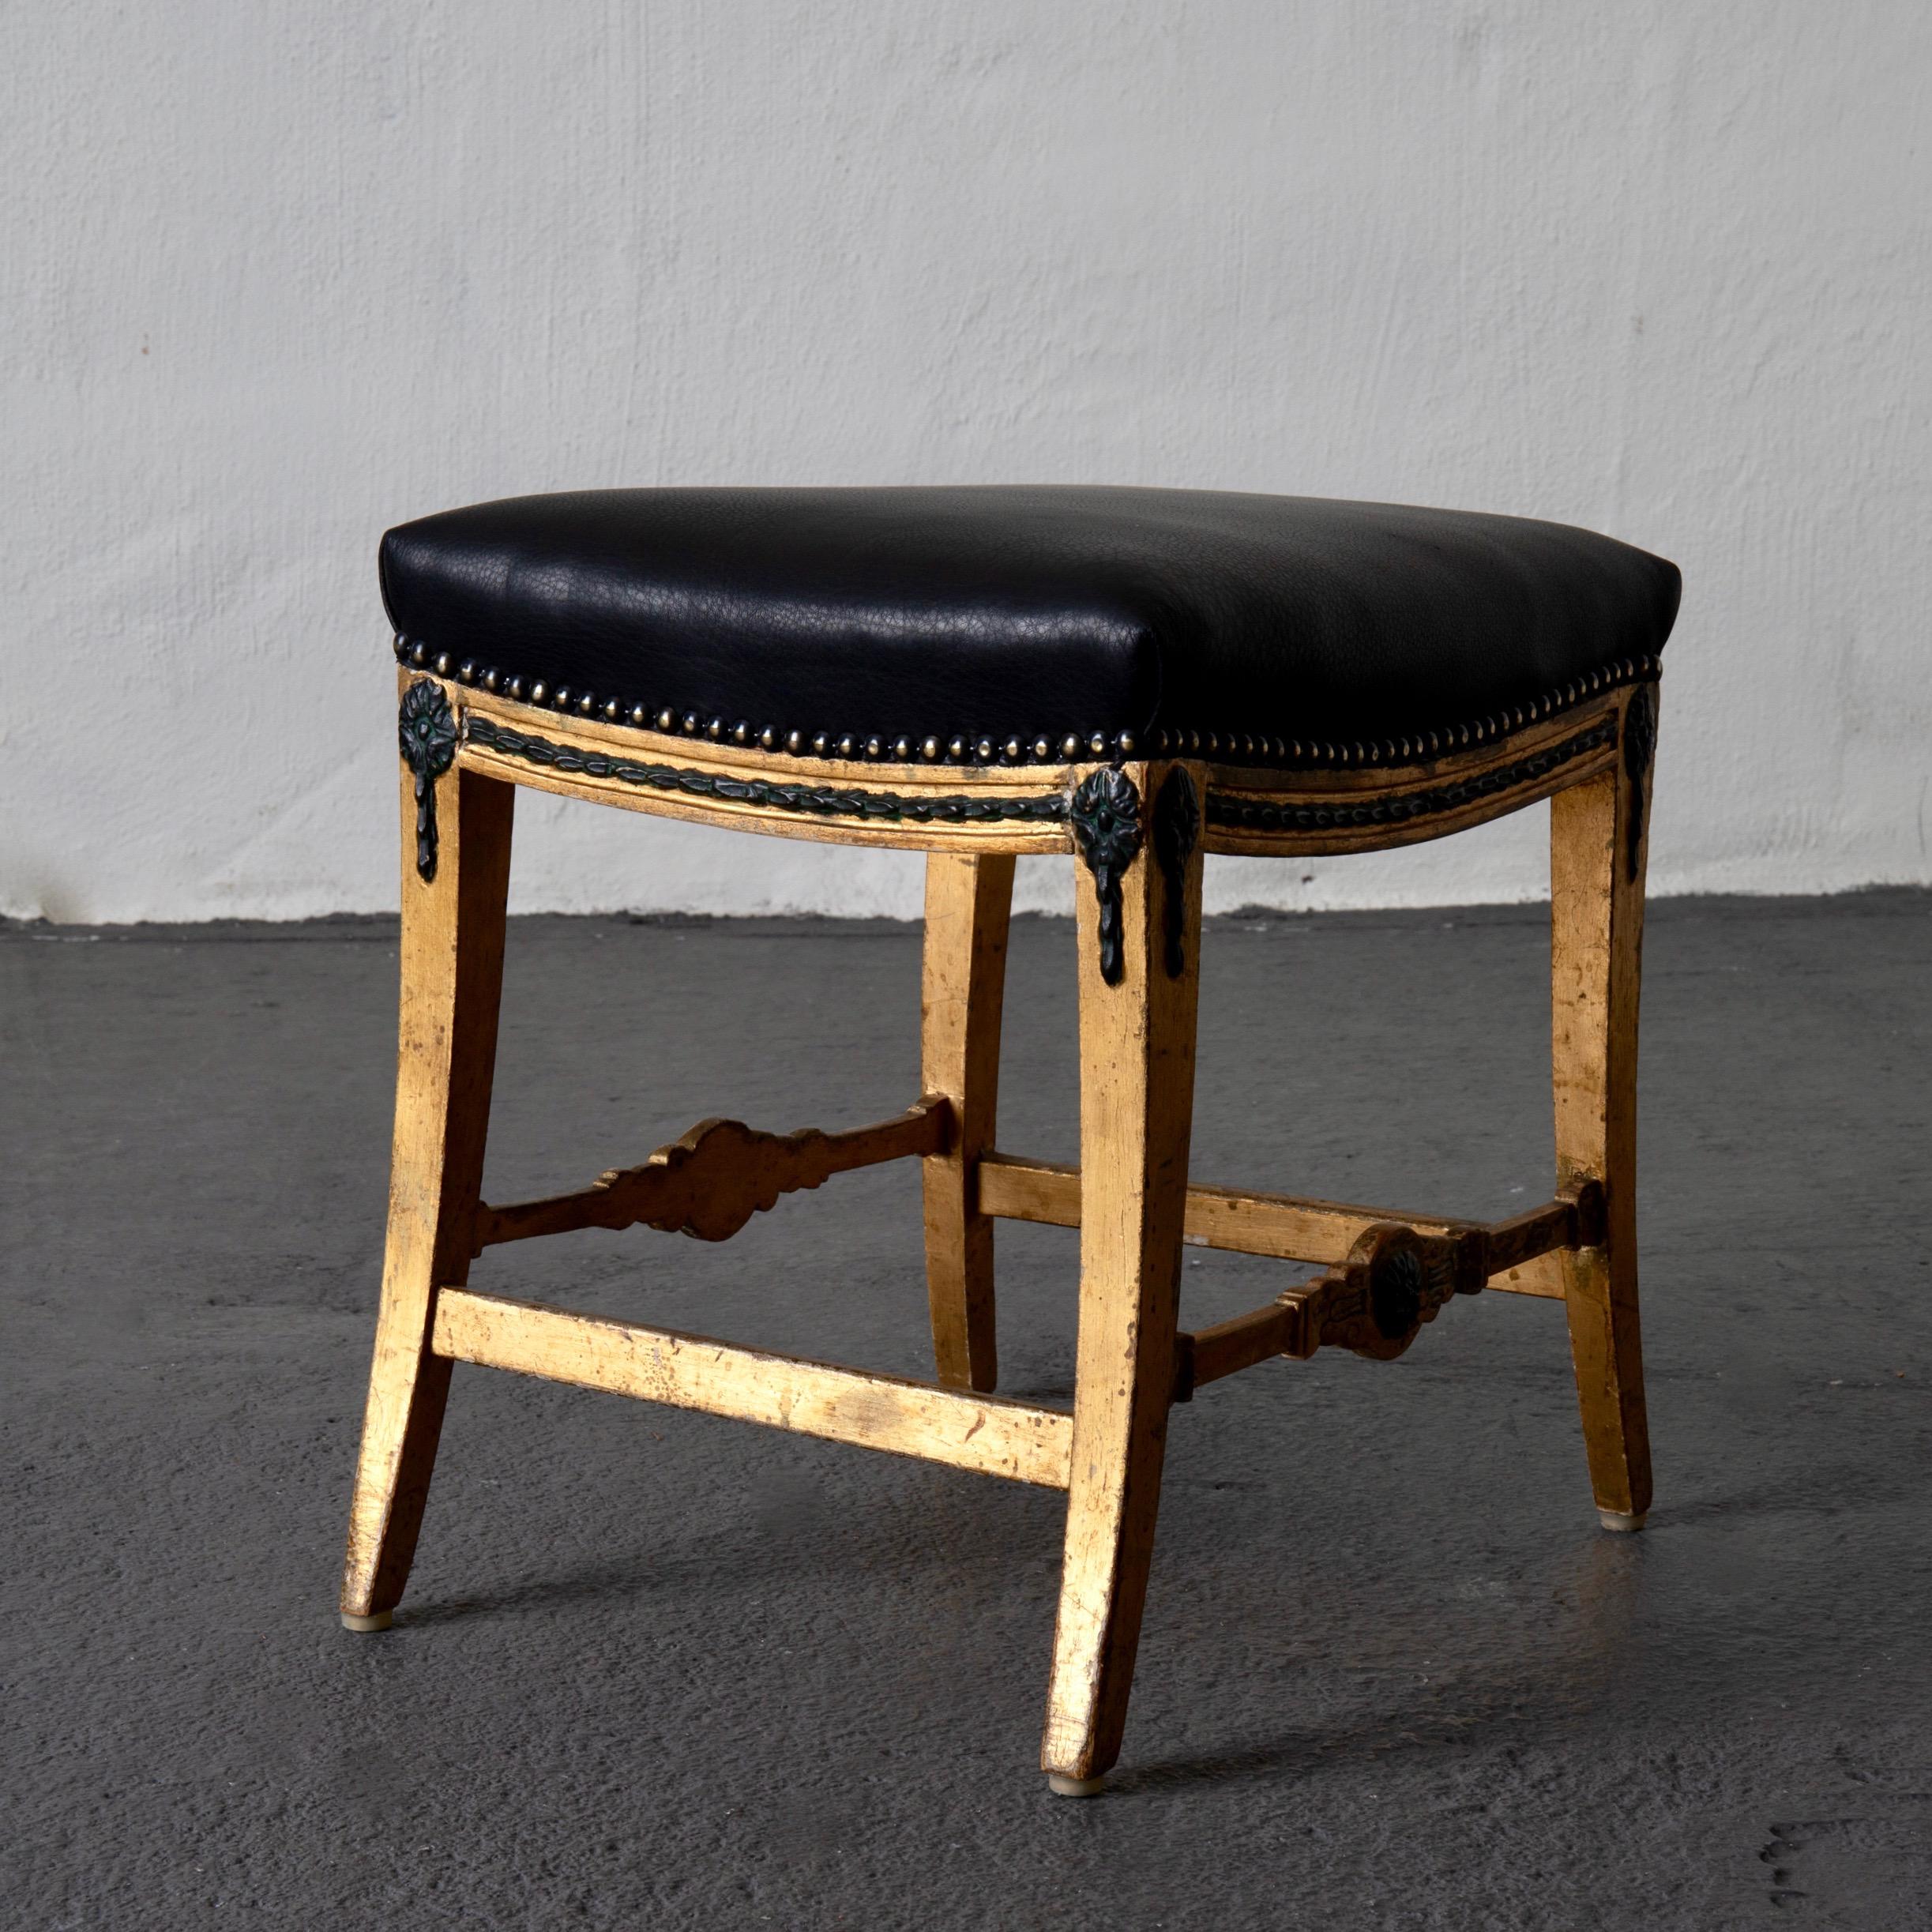 Stool Bench Swedish Neoclassical 18th Century Gilded Black Leather Sweden 1